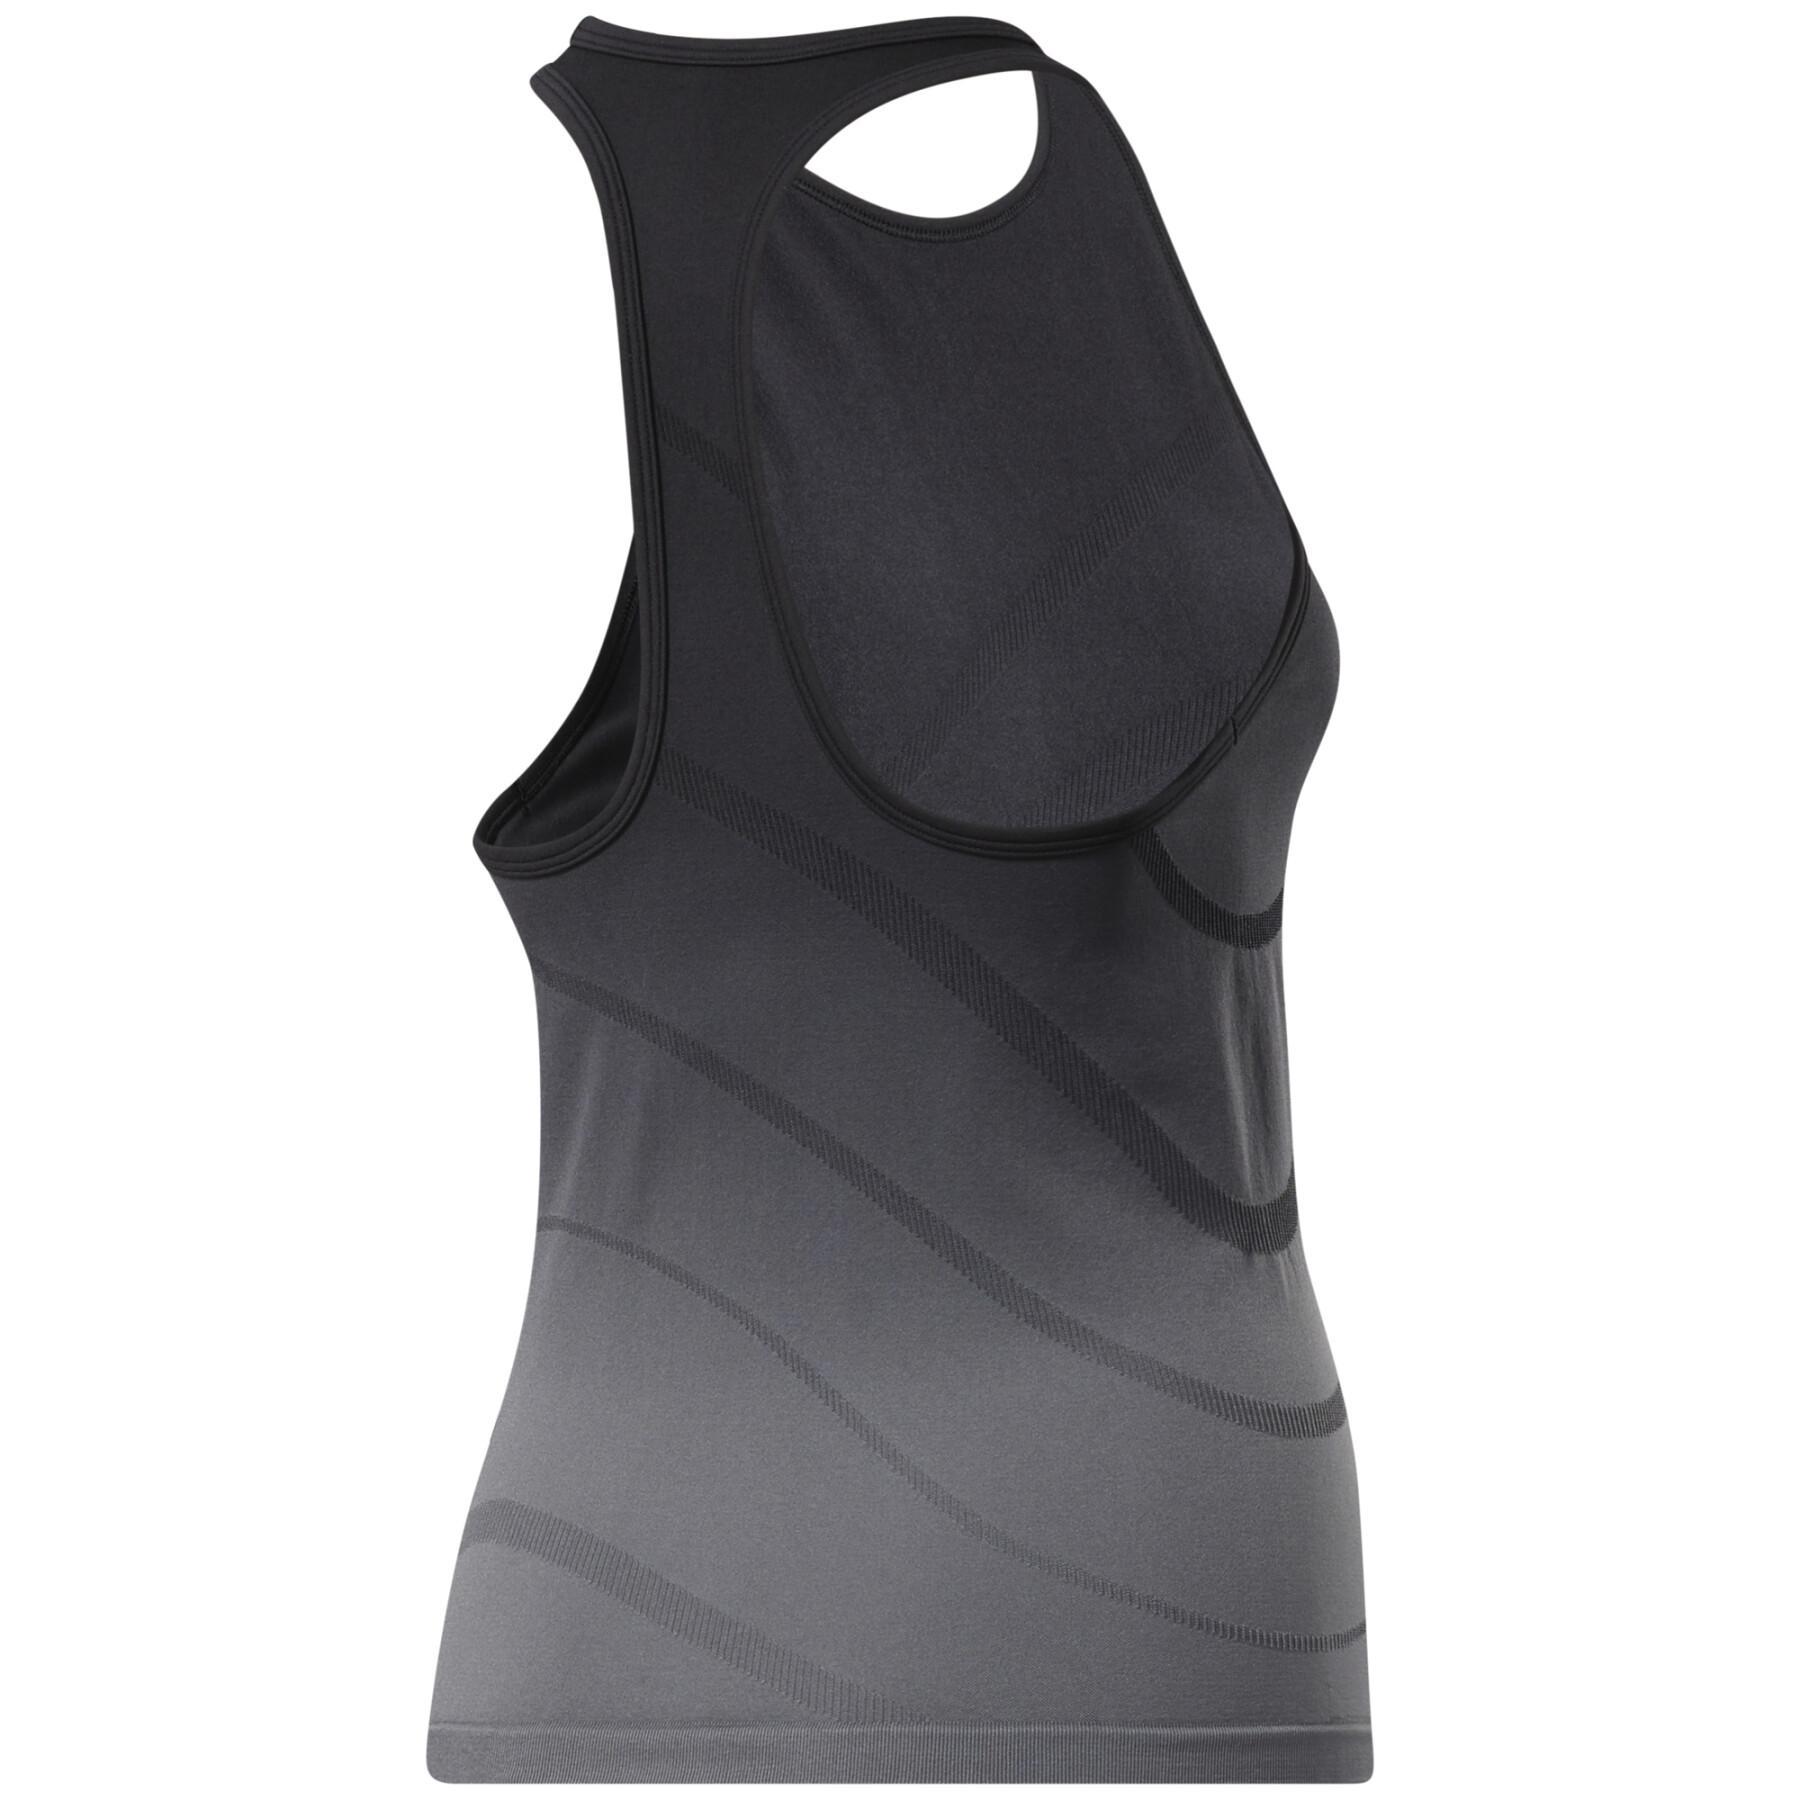 Women's tank top Reebok Sans Coutures United By Fitness